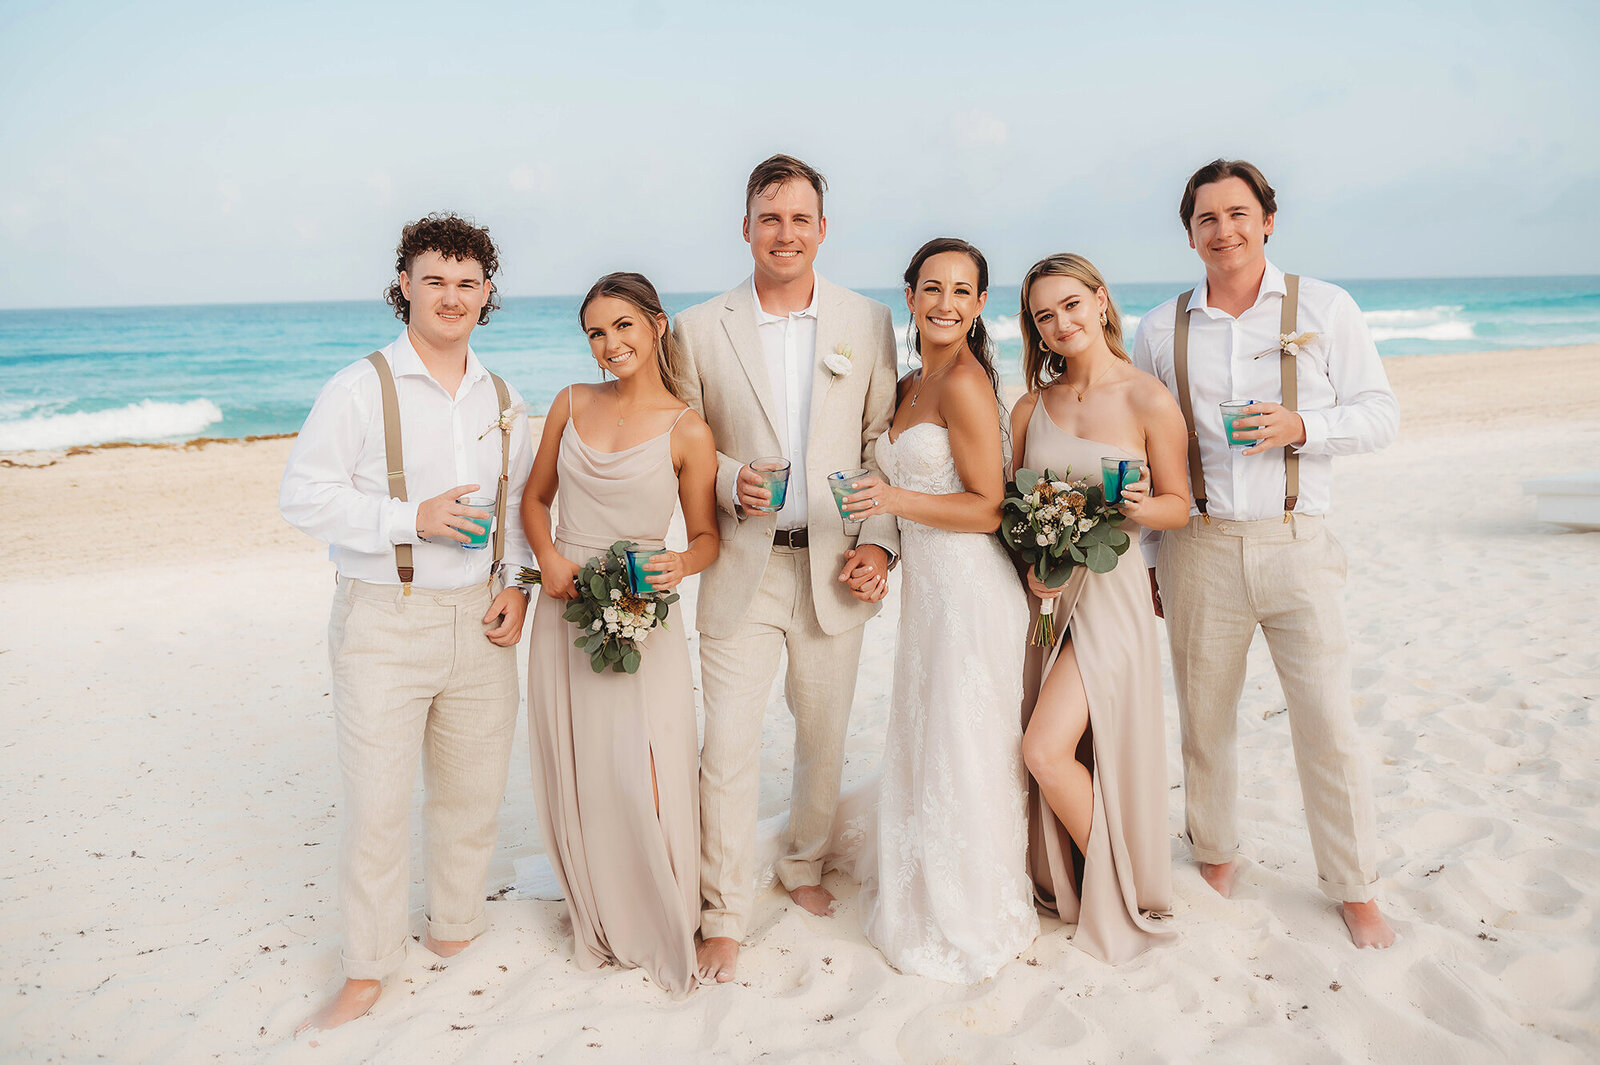 Bridal Party poses for Portraits during Micro Wedding at Live Aqua Resort in Cancun Mexico.